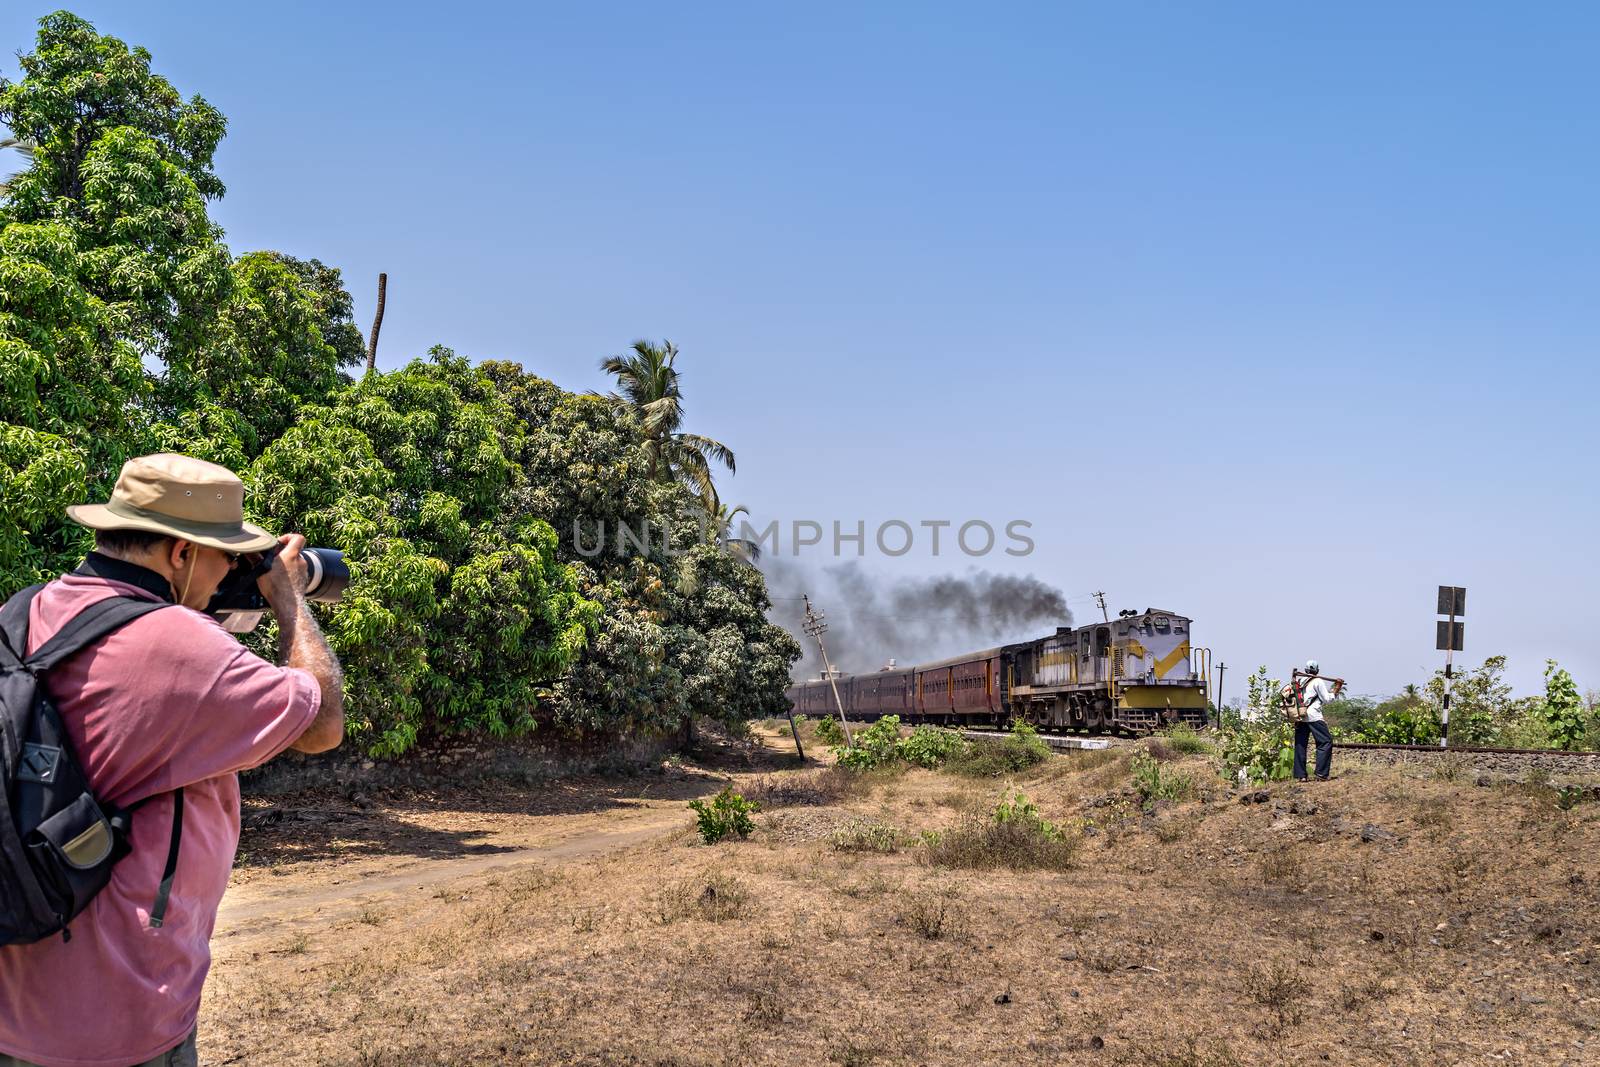 Talala, Gujrat, India - April 17, 2018 : A trainspotter pursuing his hobby of trainspotting. by lalam